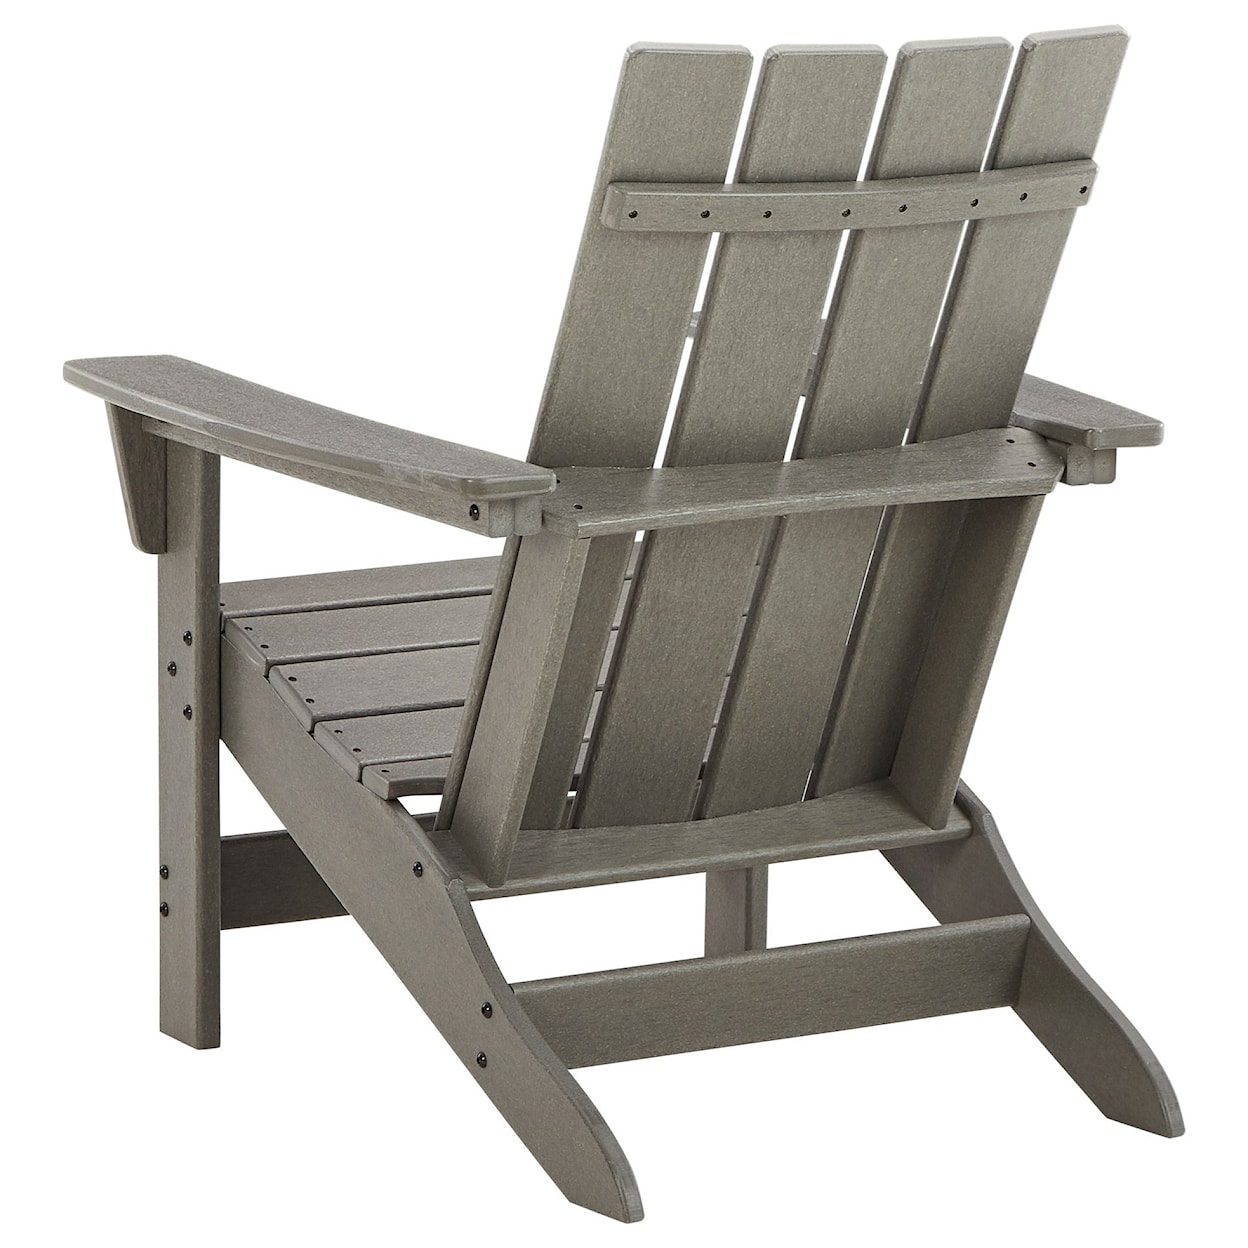 Signature Design by Ashley Visola 3-Piece Adirondack Chairs and Table Set